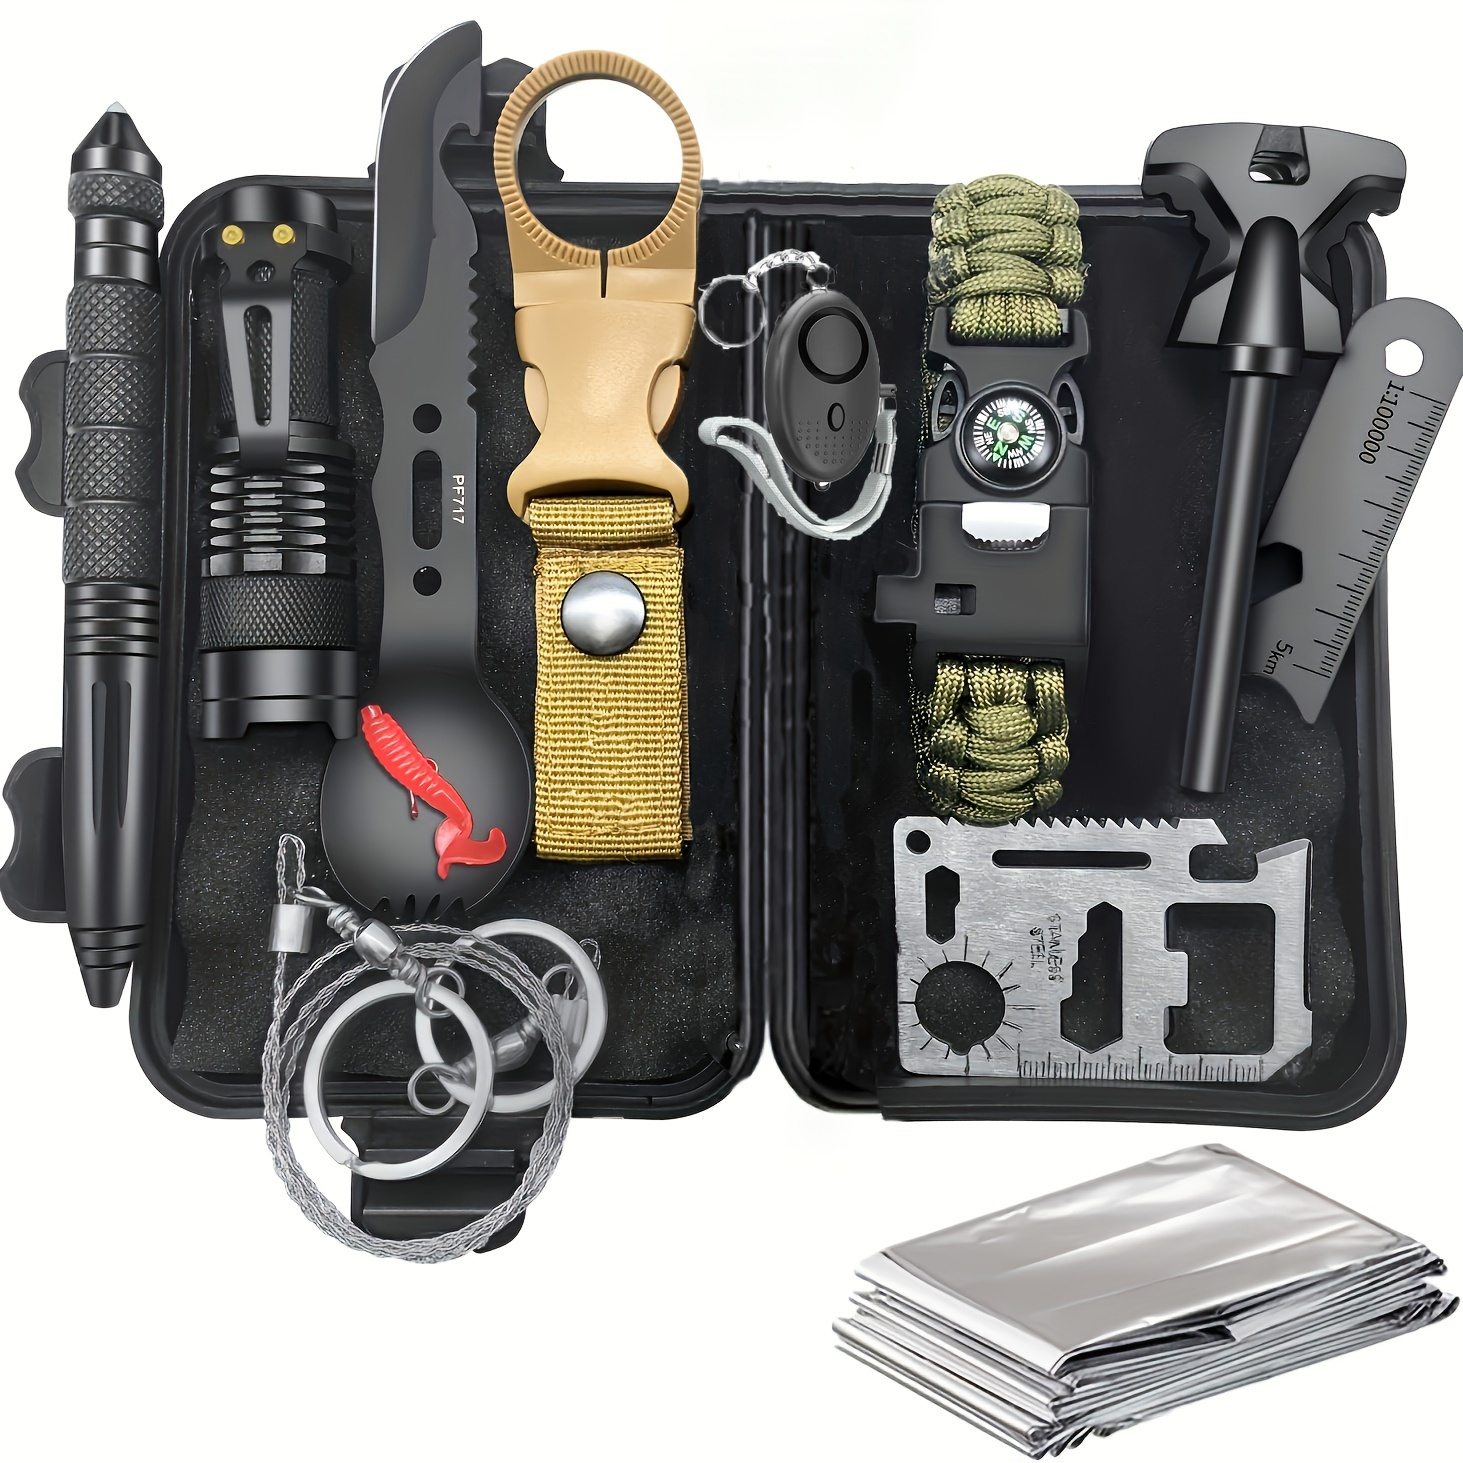 Gifts for Men Dad Him Birthday Christmas Fathers Day, Cool Gadget/Survival  Gear and Equipment, Unique Camping Hunting Hiking Outdoor Gear, Gift Idea